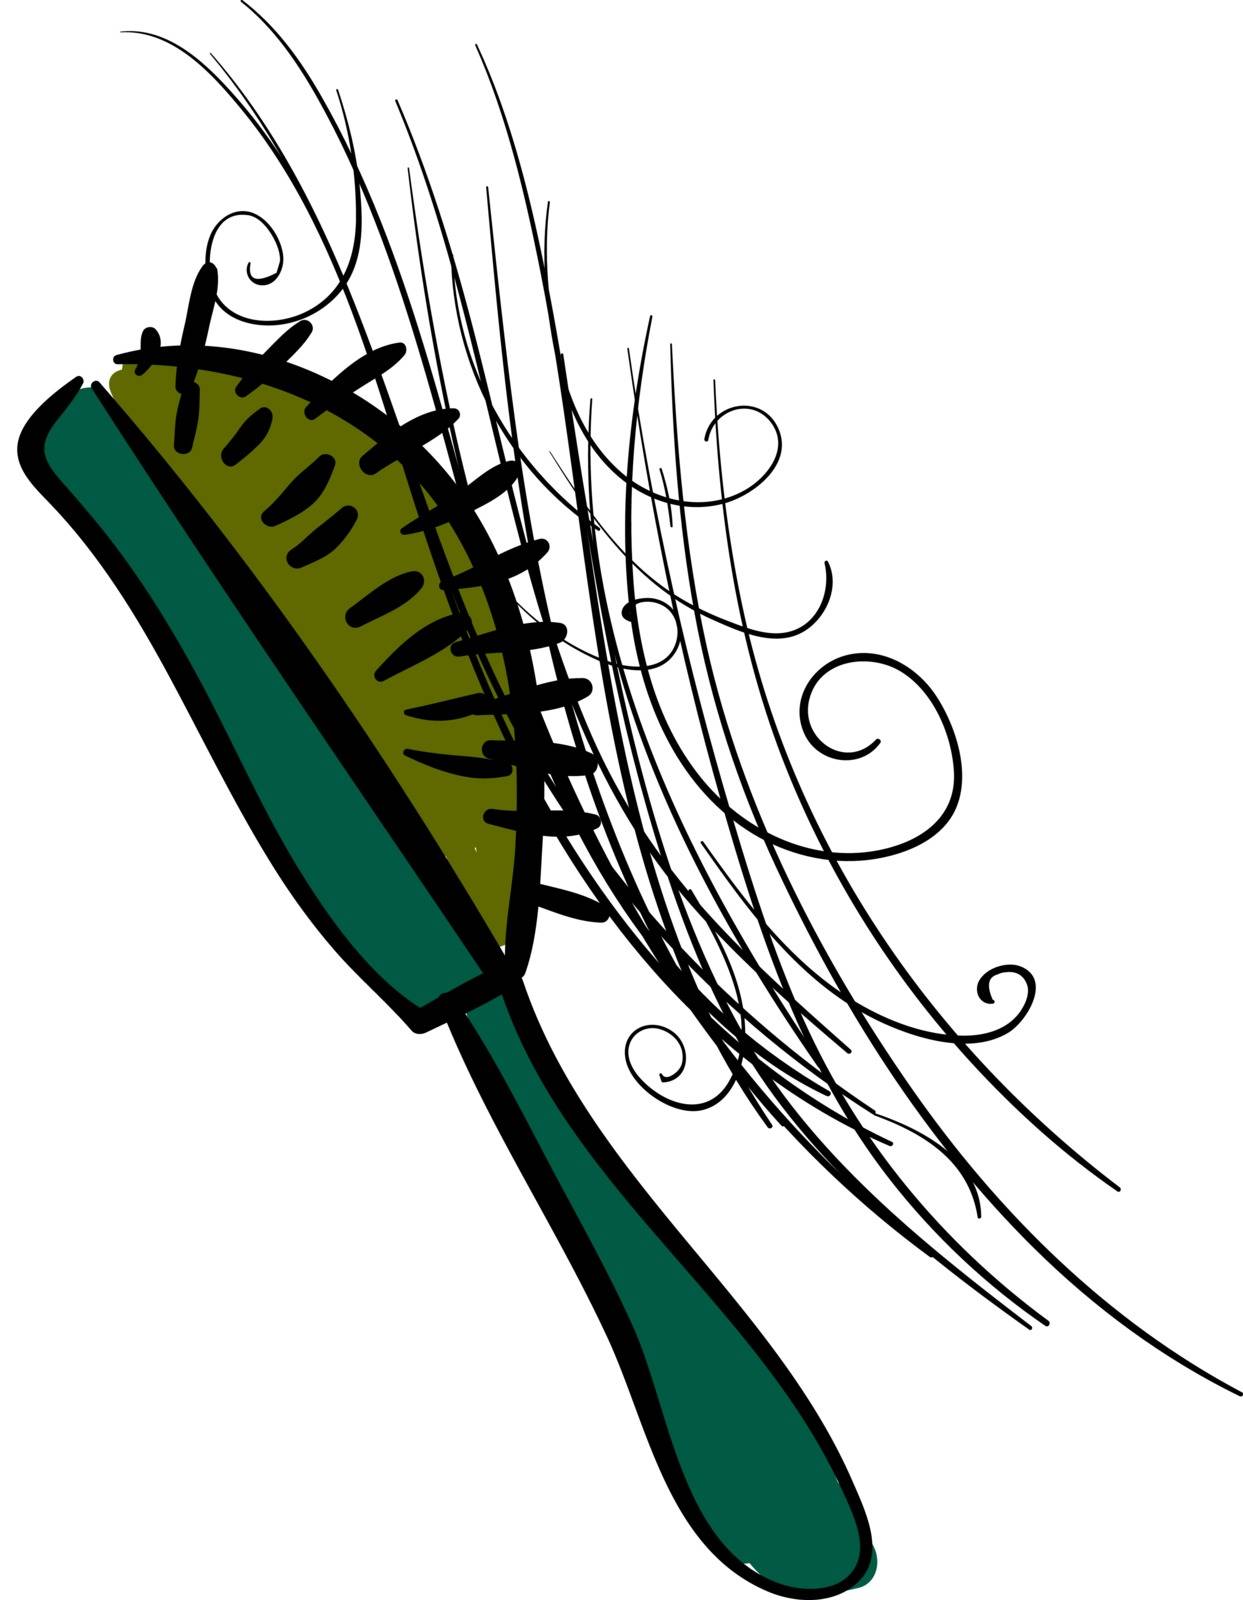 Green comb with hair, illustration, vector on white background. by Morphart